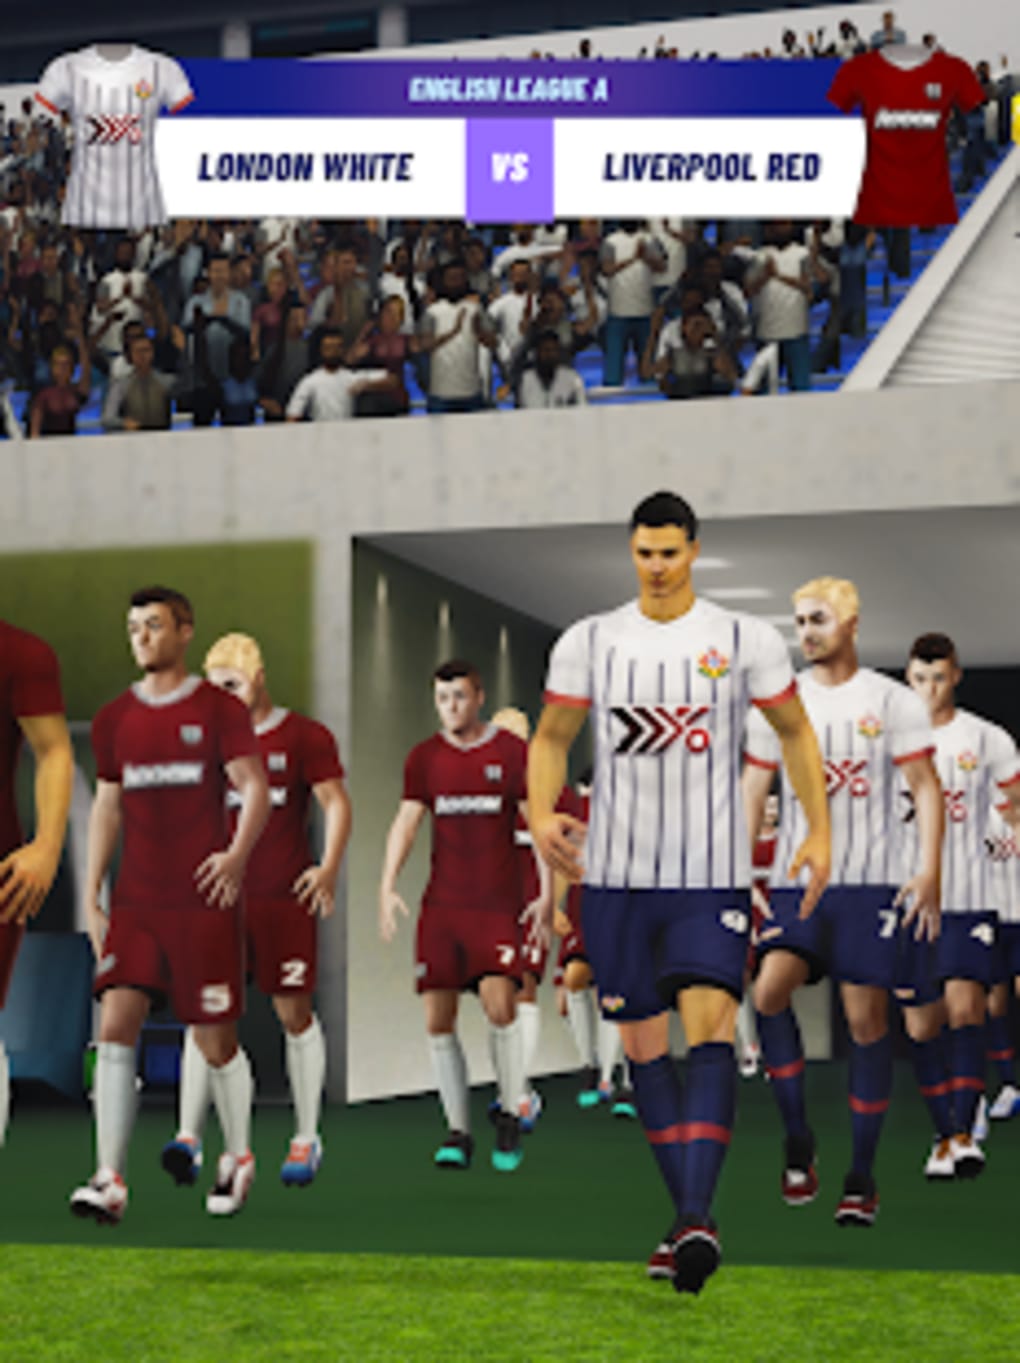 Soccer Super Star APK Download for Android Free